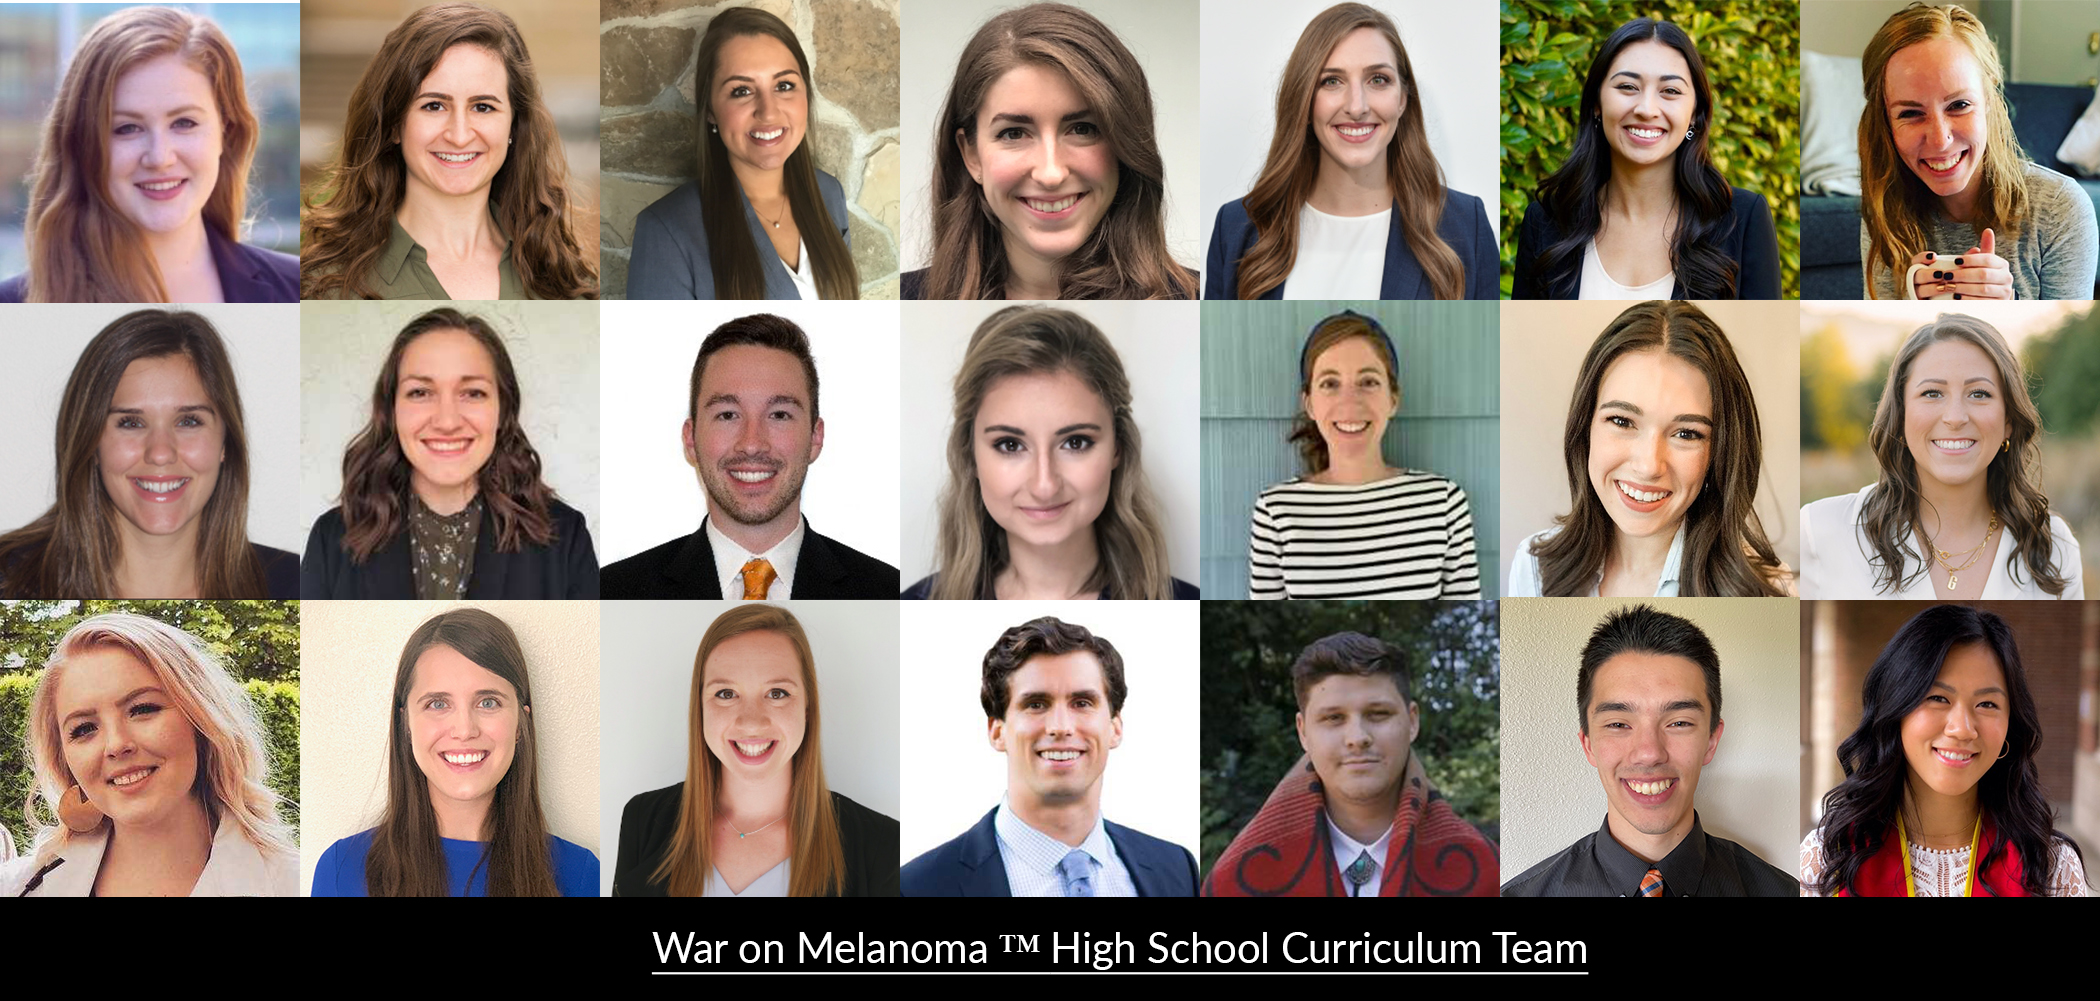 A collage of portraits for all of the medical students working on the High School Curriculum Program